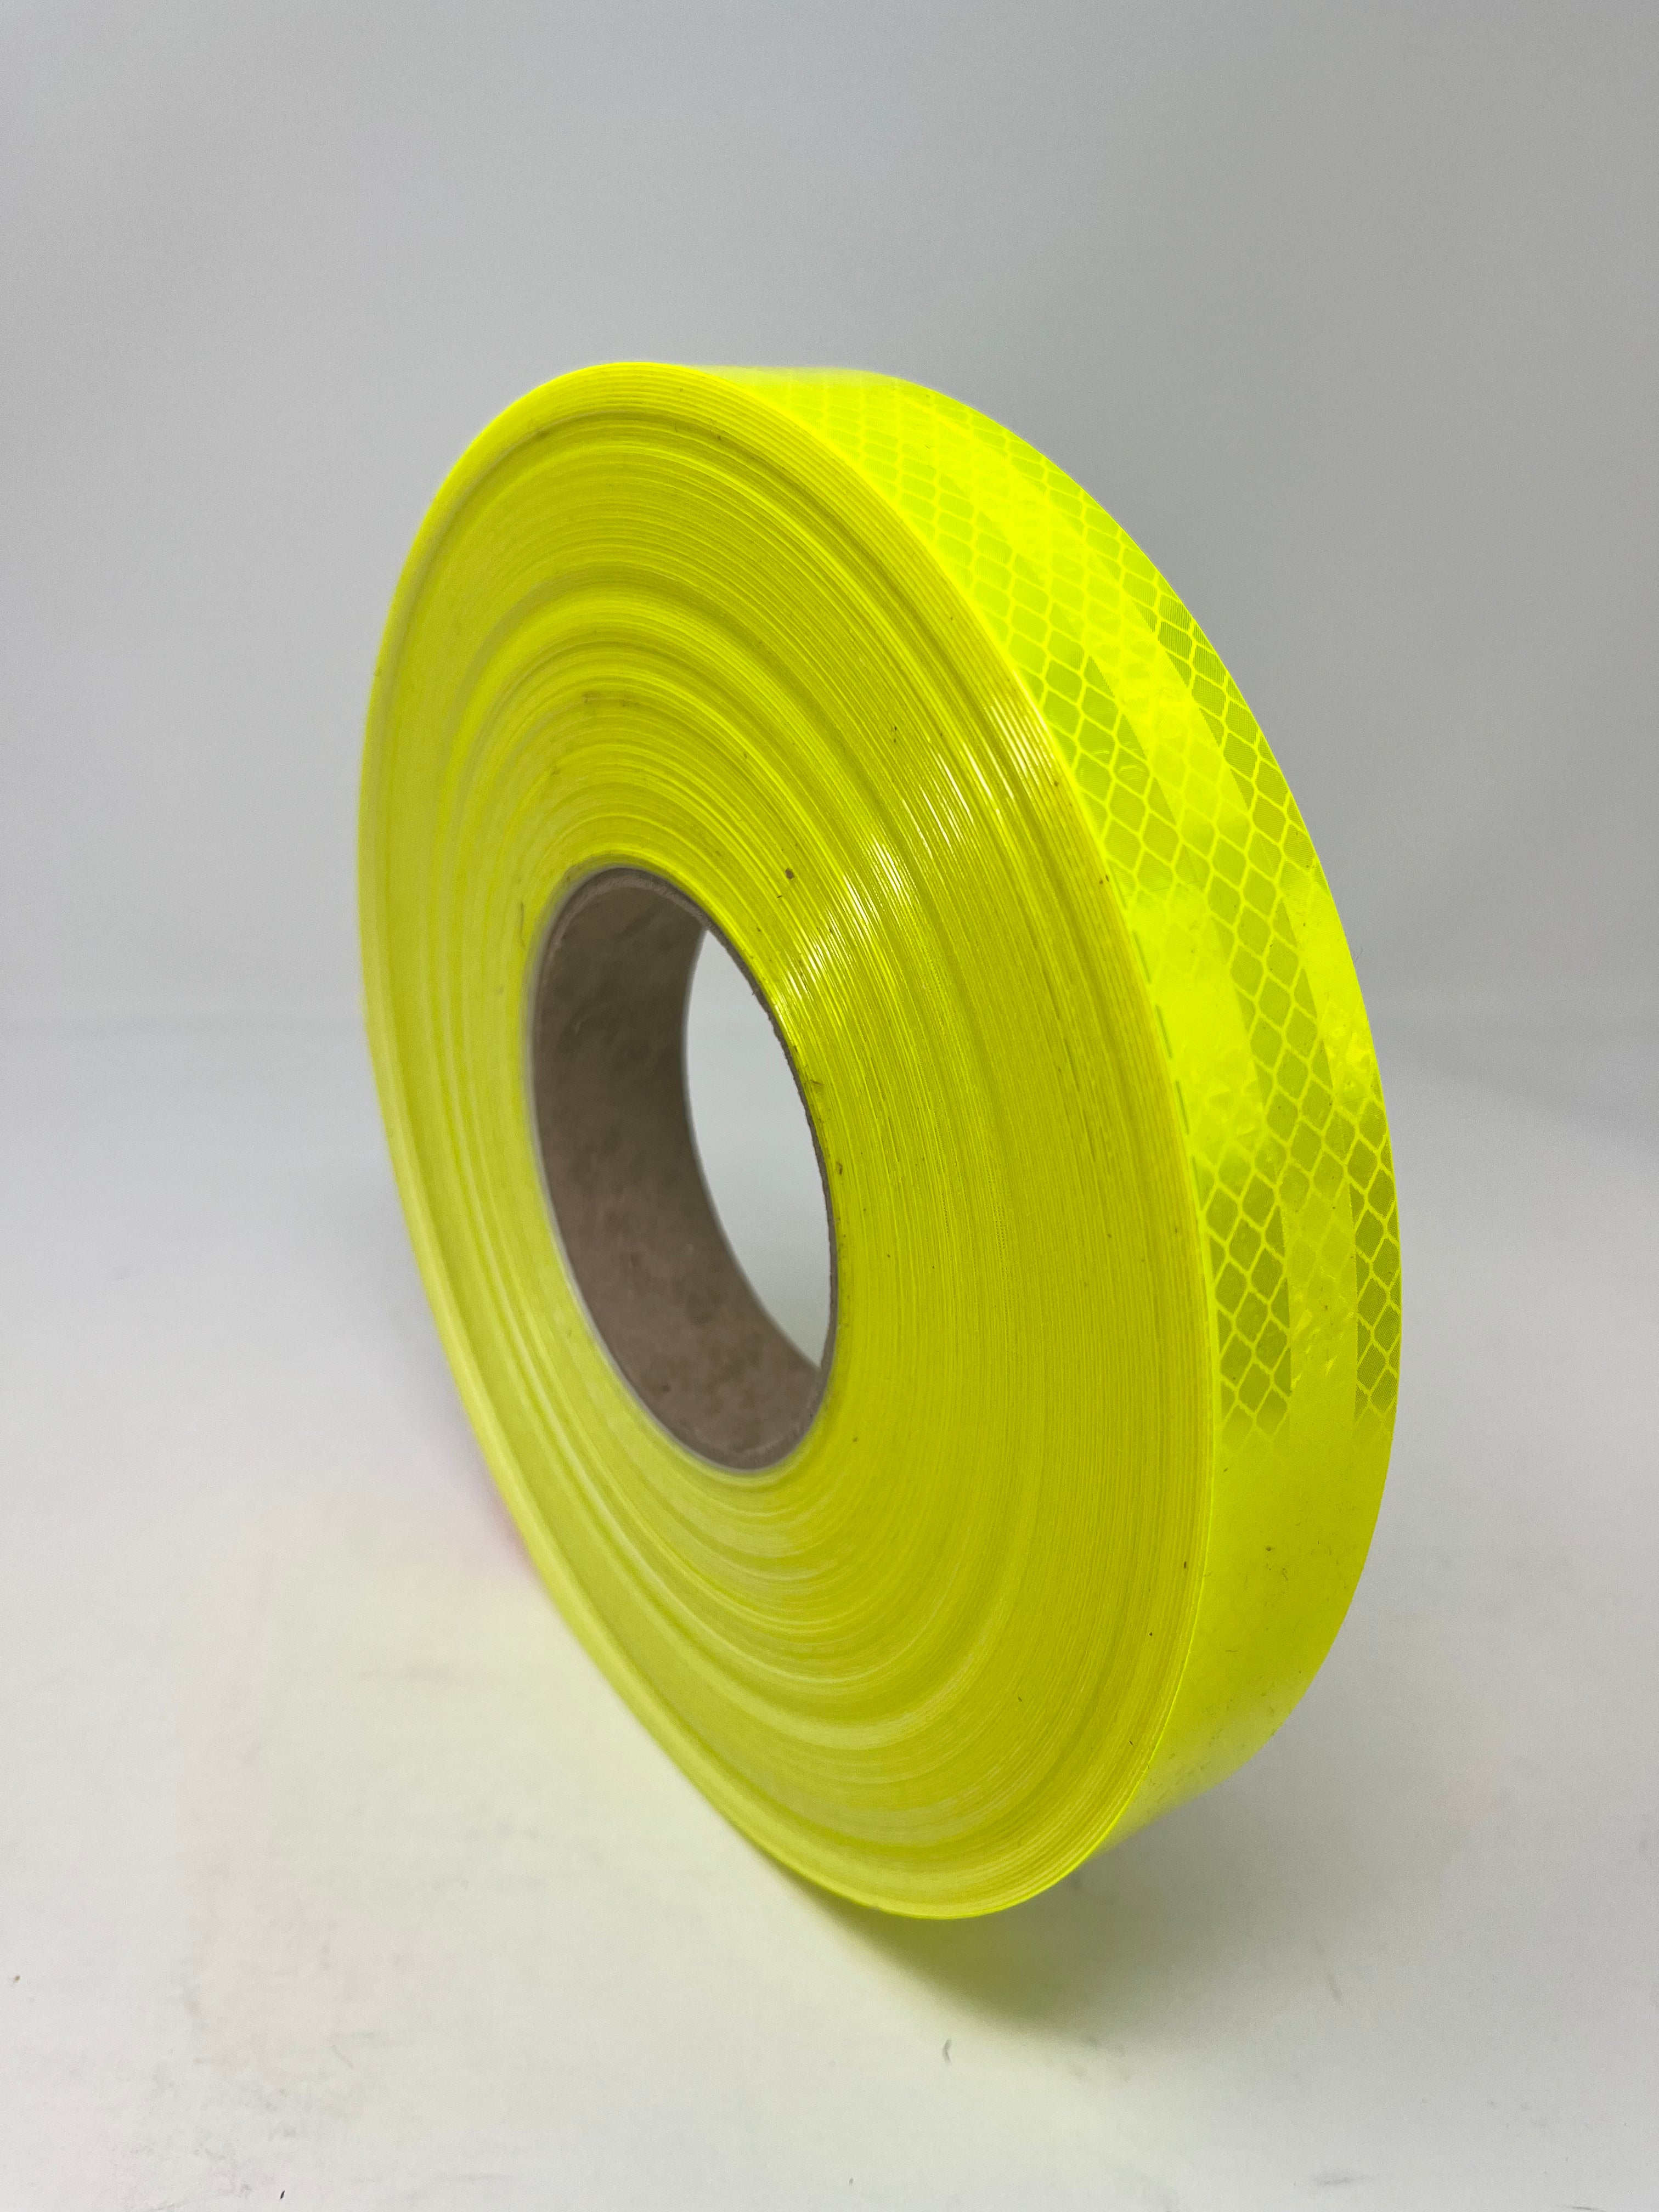 iron on reflective tape products for sale